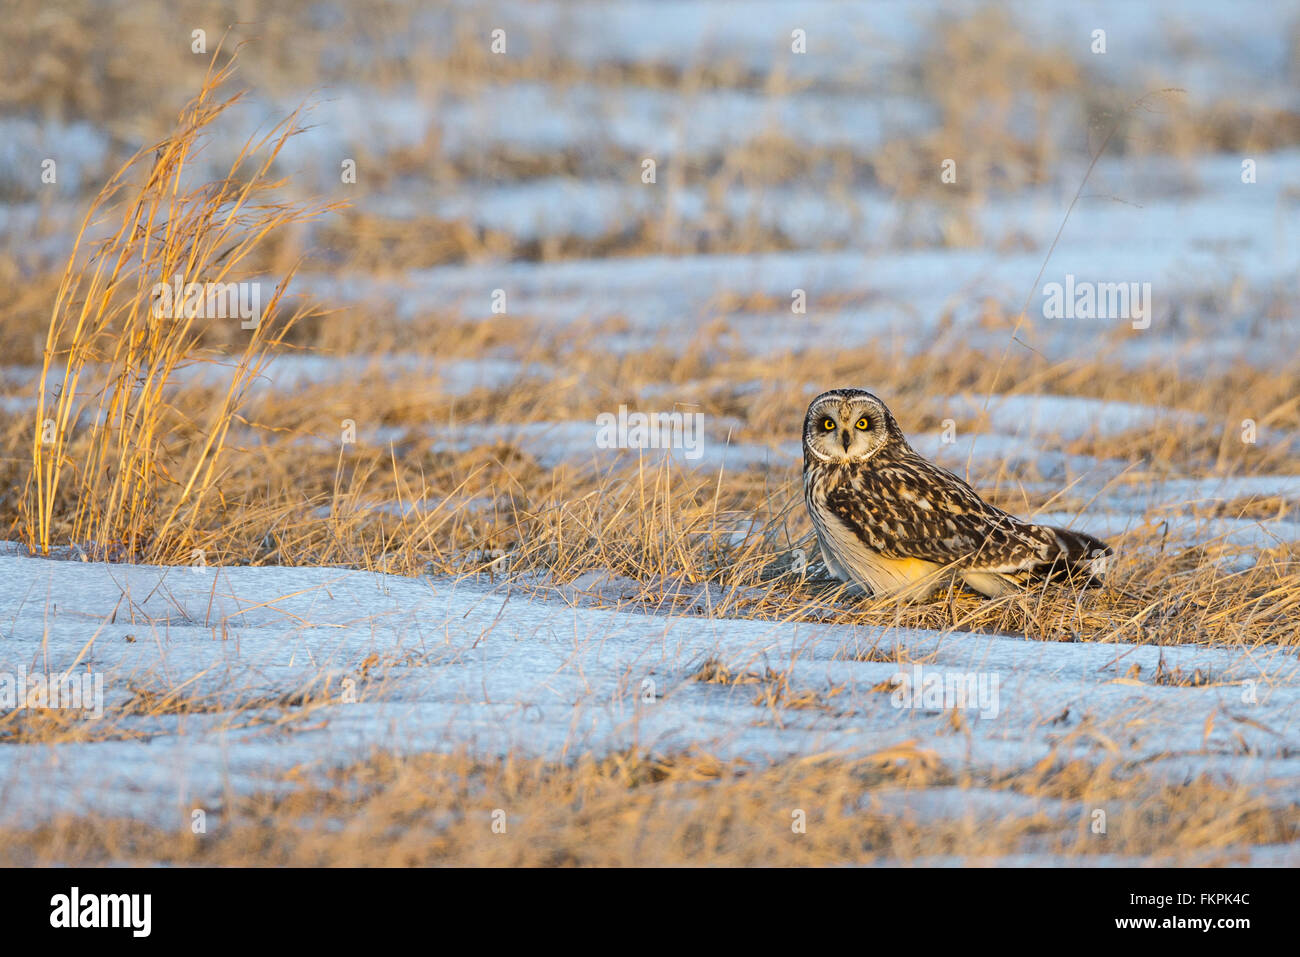 Short-eared owl standing on snowy field while hunting Stock Photo